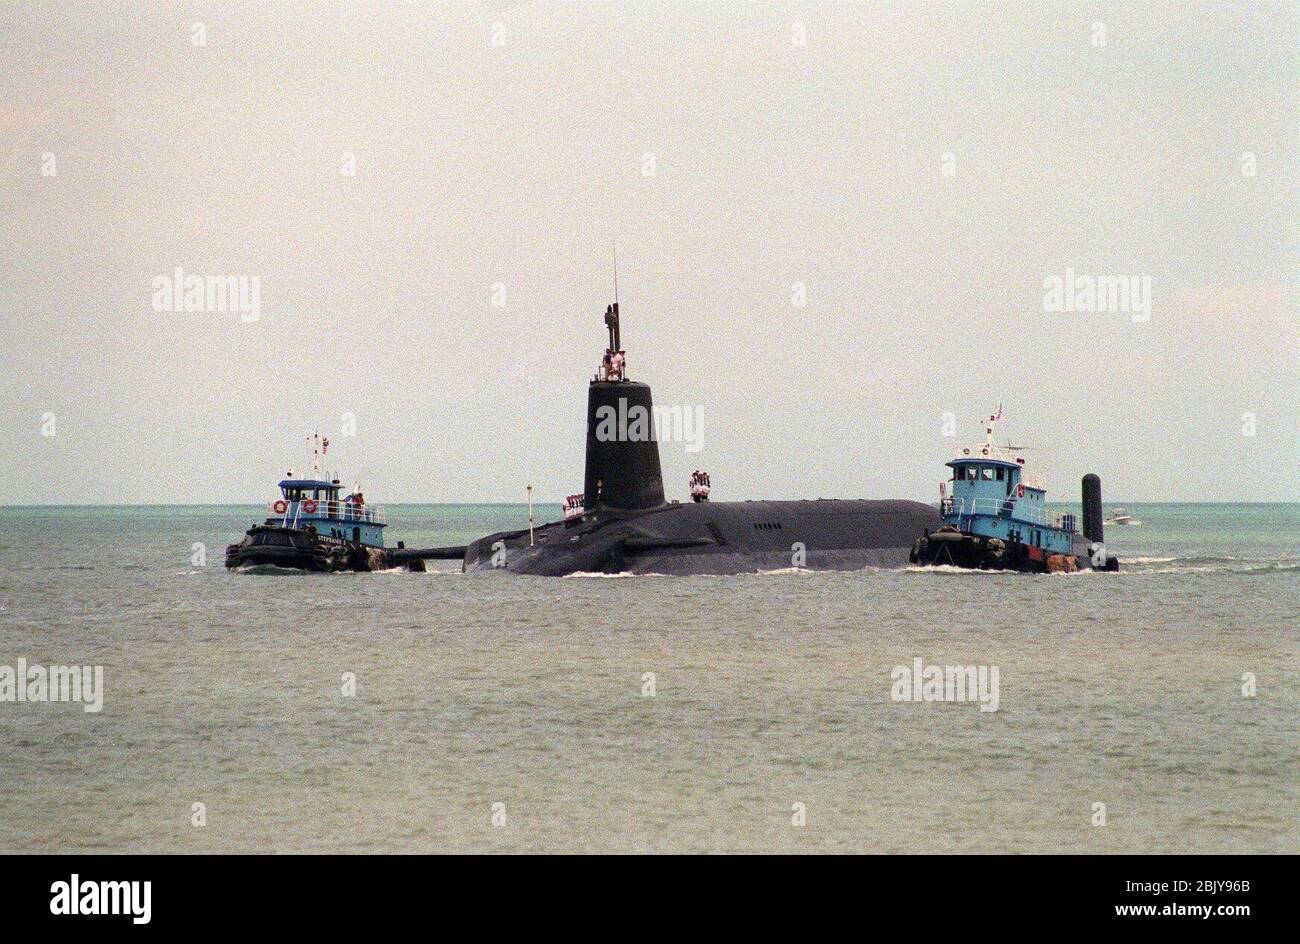 Hms Vanguard High Resolution Stock Photography And Images Alamy